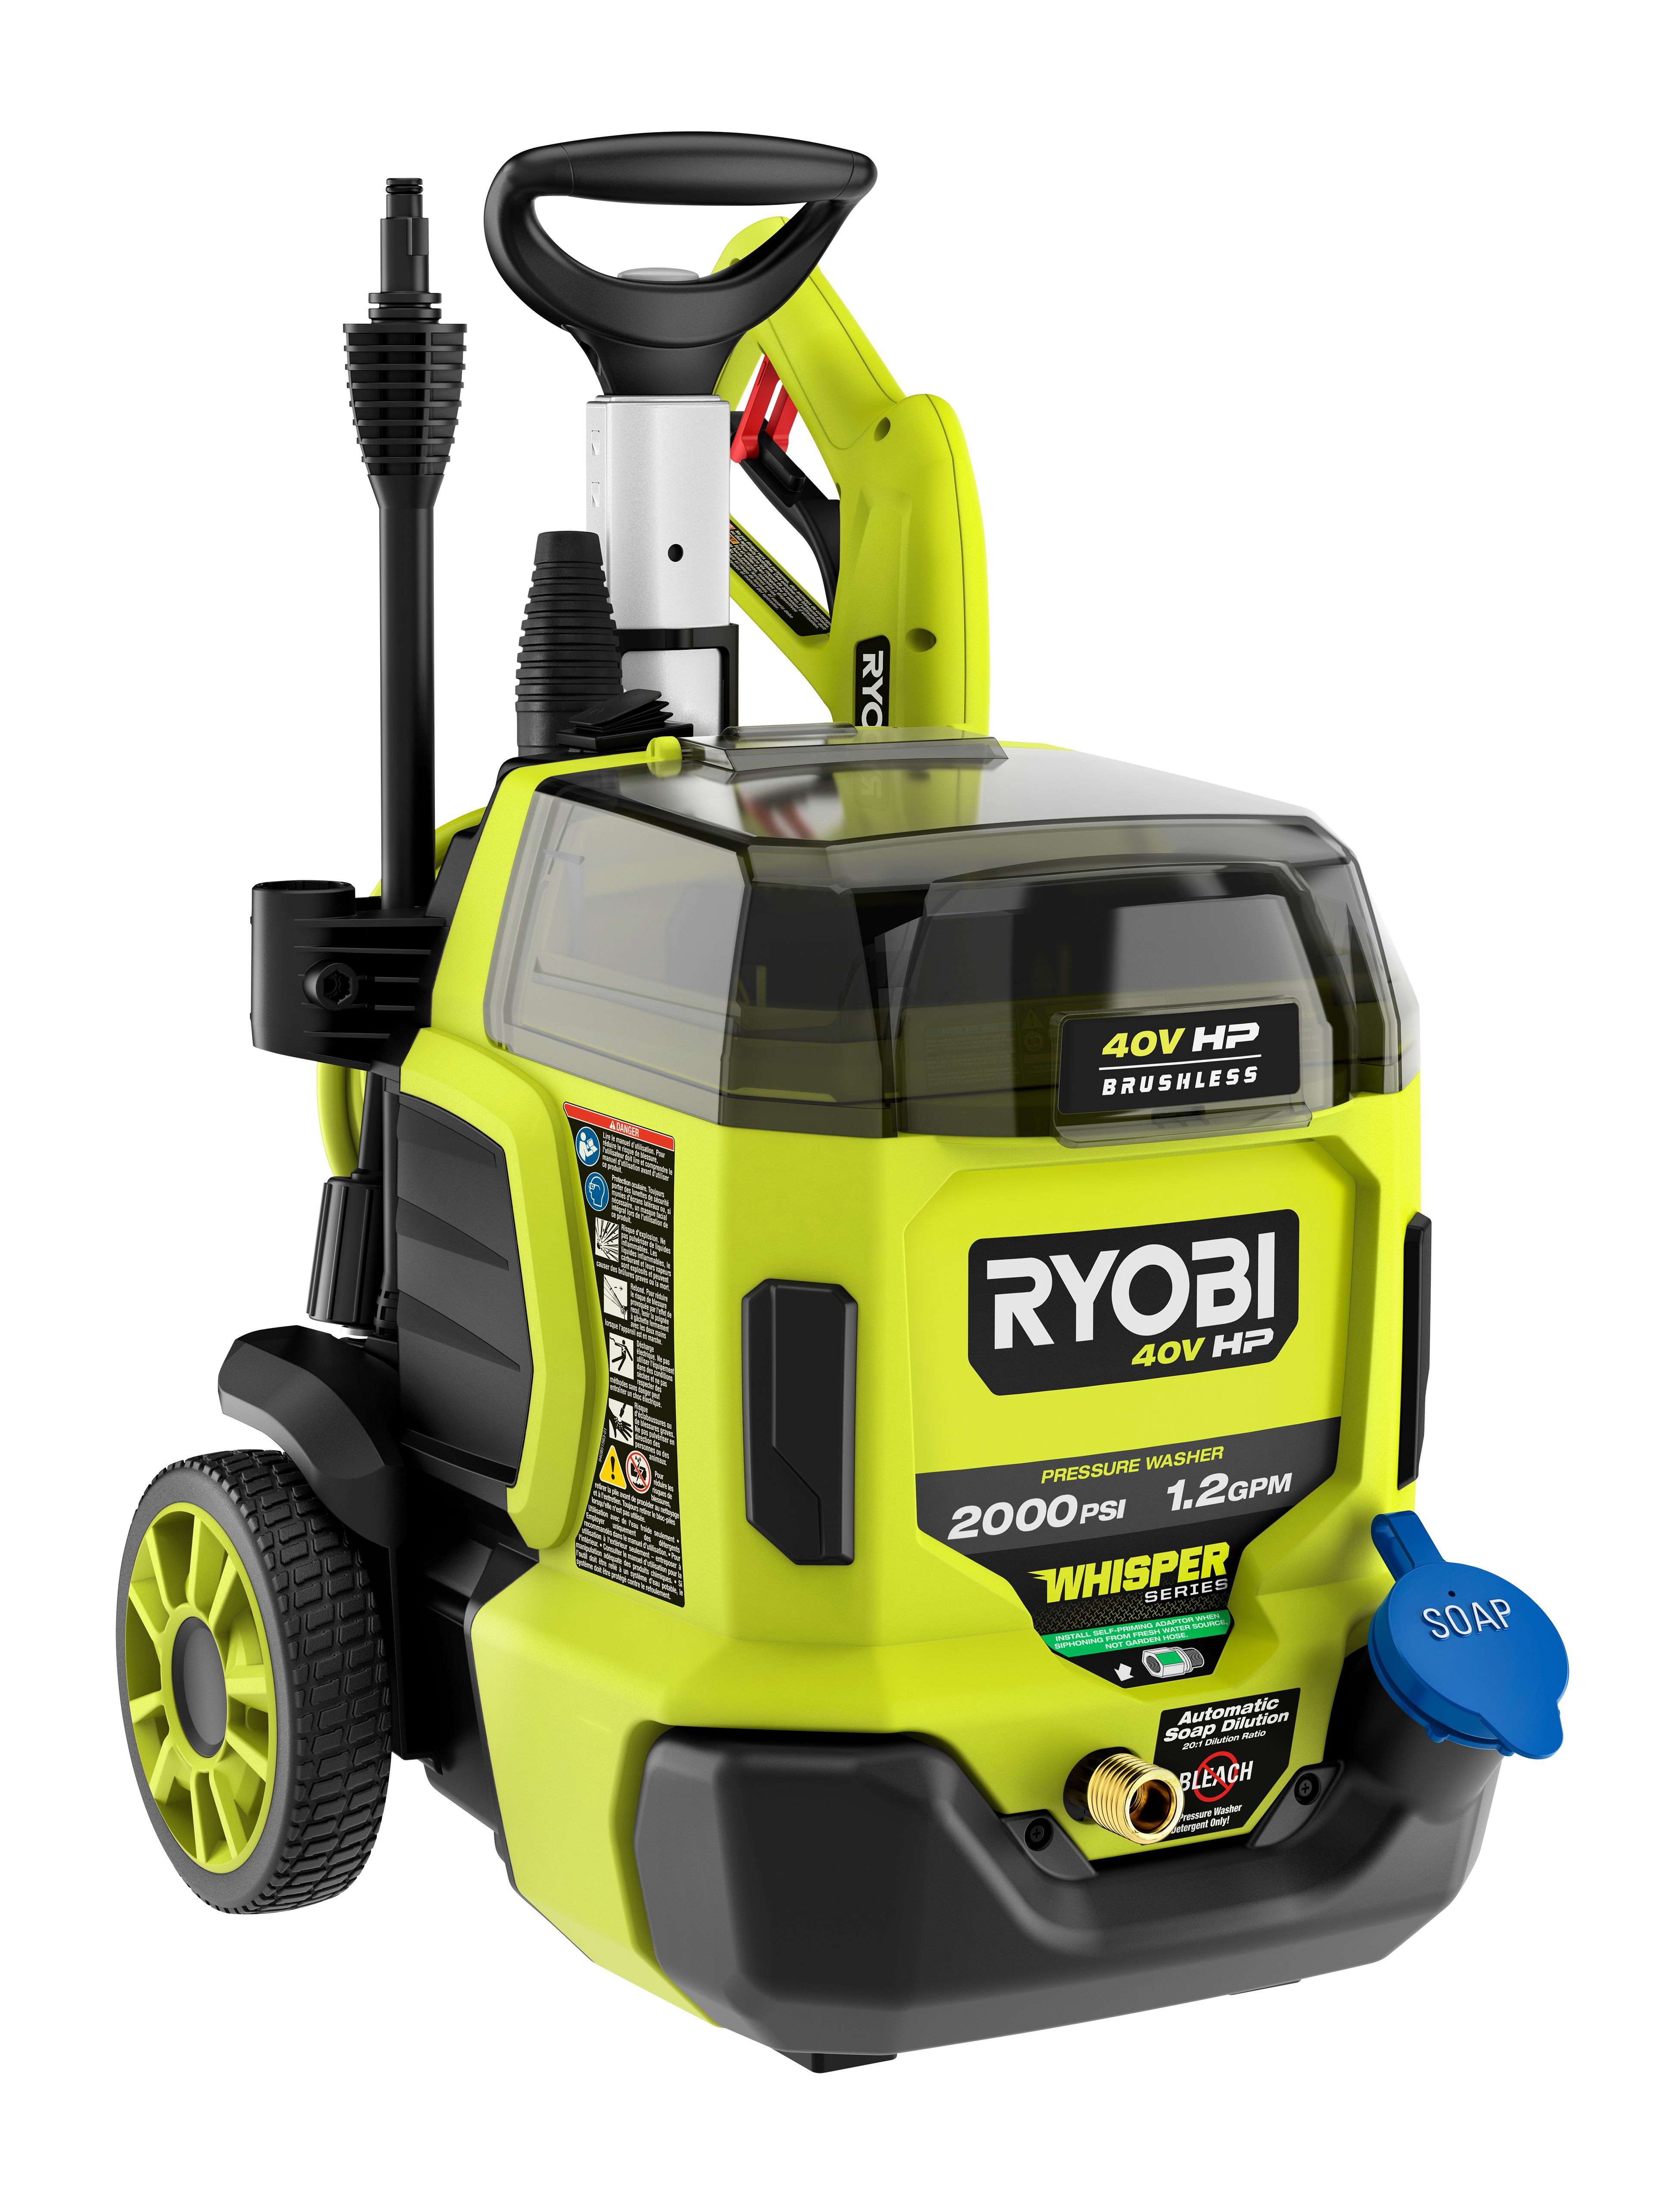 •	Enhance your pressure washer with RY31012VNM 12" surface cleaner for quick, streak-free cleaning, RY31211 Water Broom for effective dirt and debris removal, and the RY31F04 Foam Blaster for controlled foam detergent dispensing